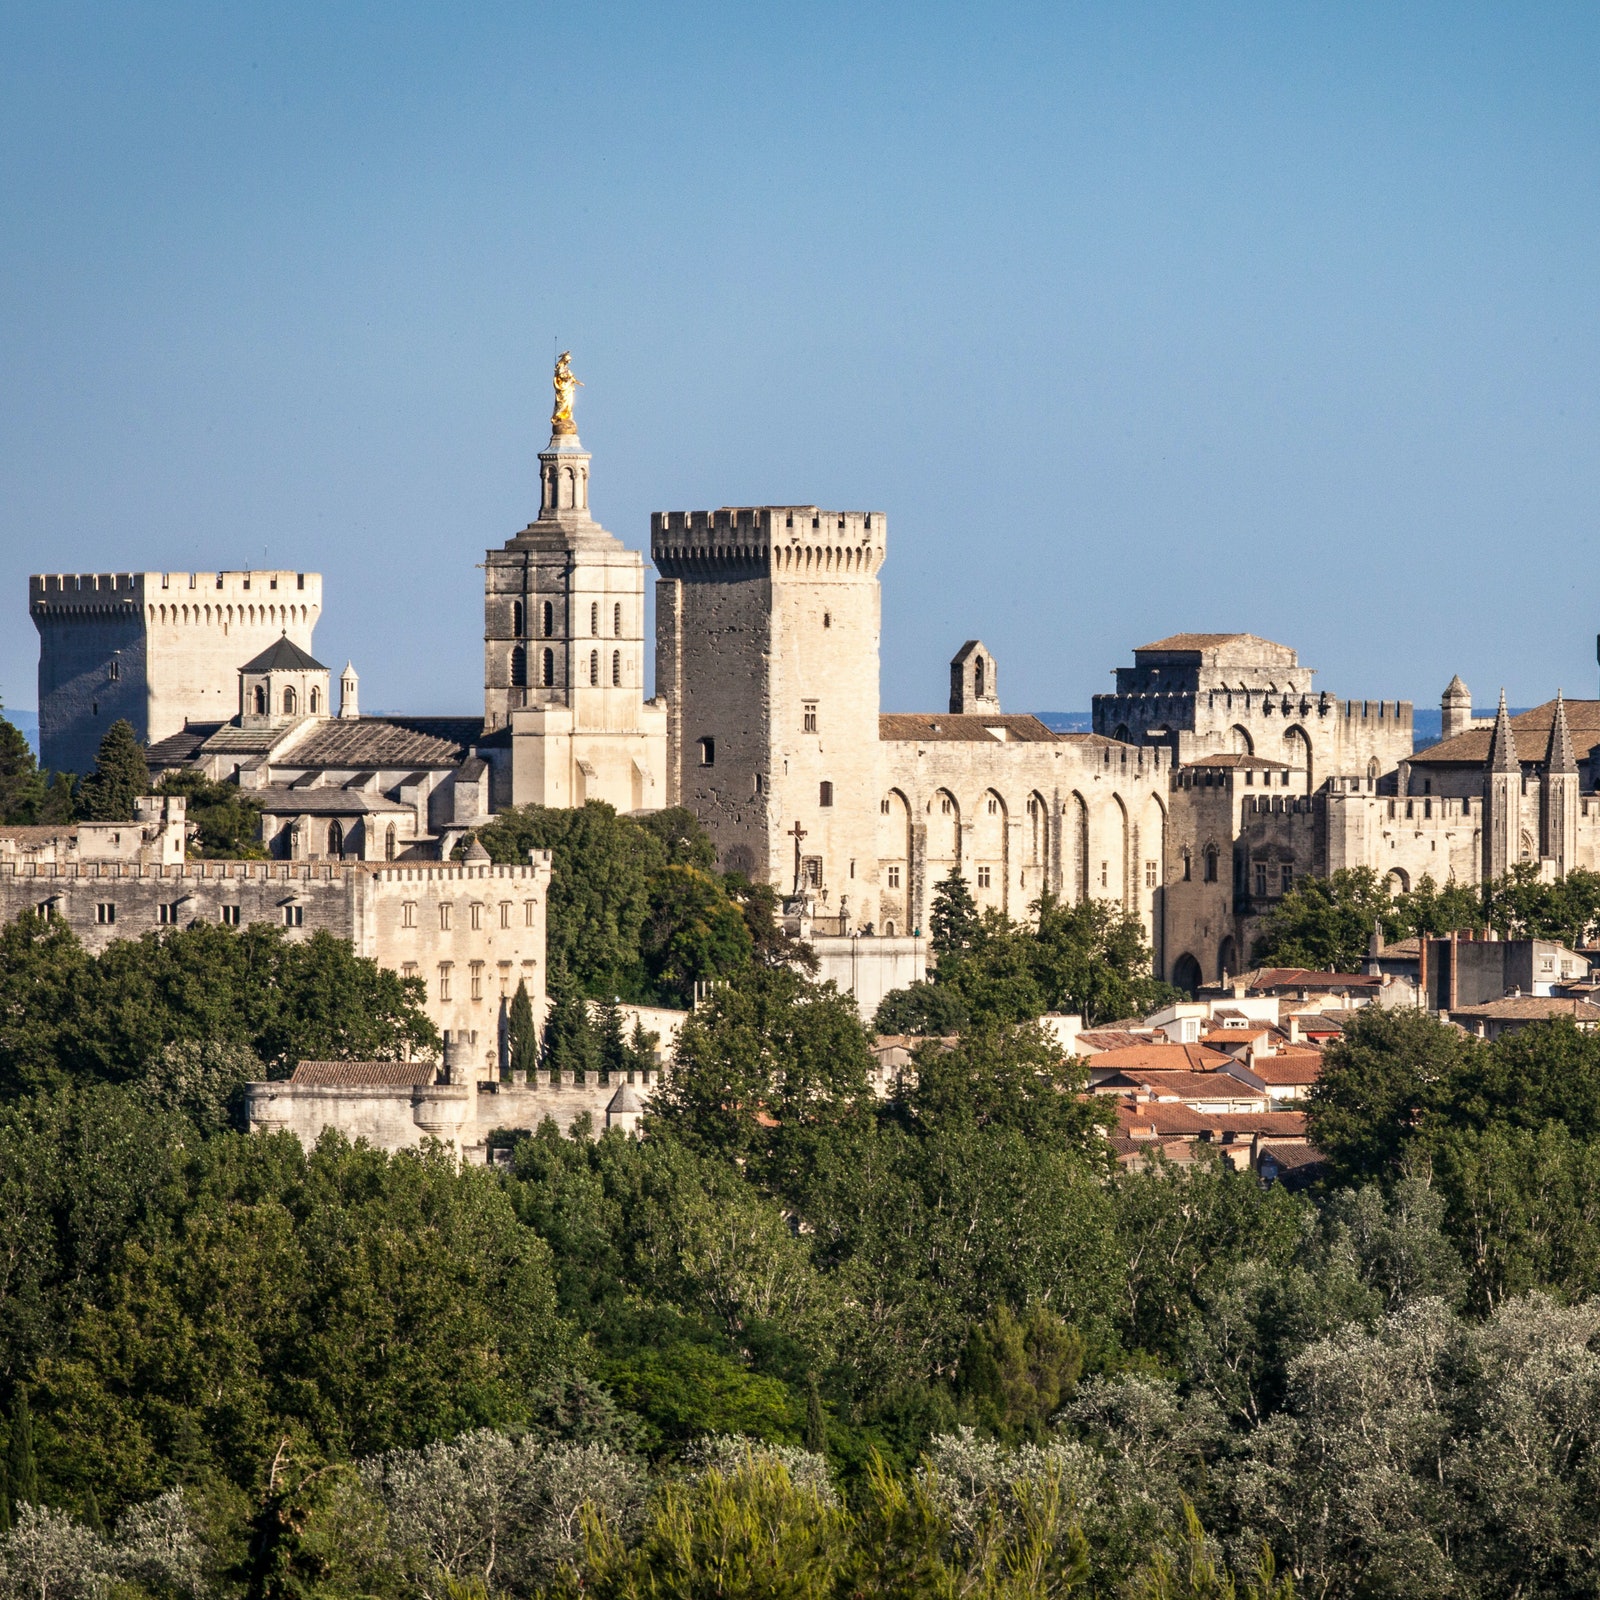 Palace of the Popes & Avignon Bridge in France